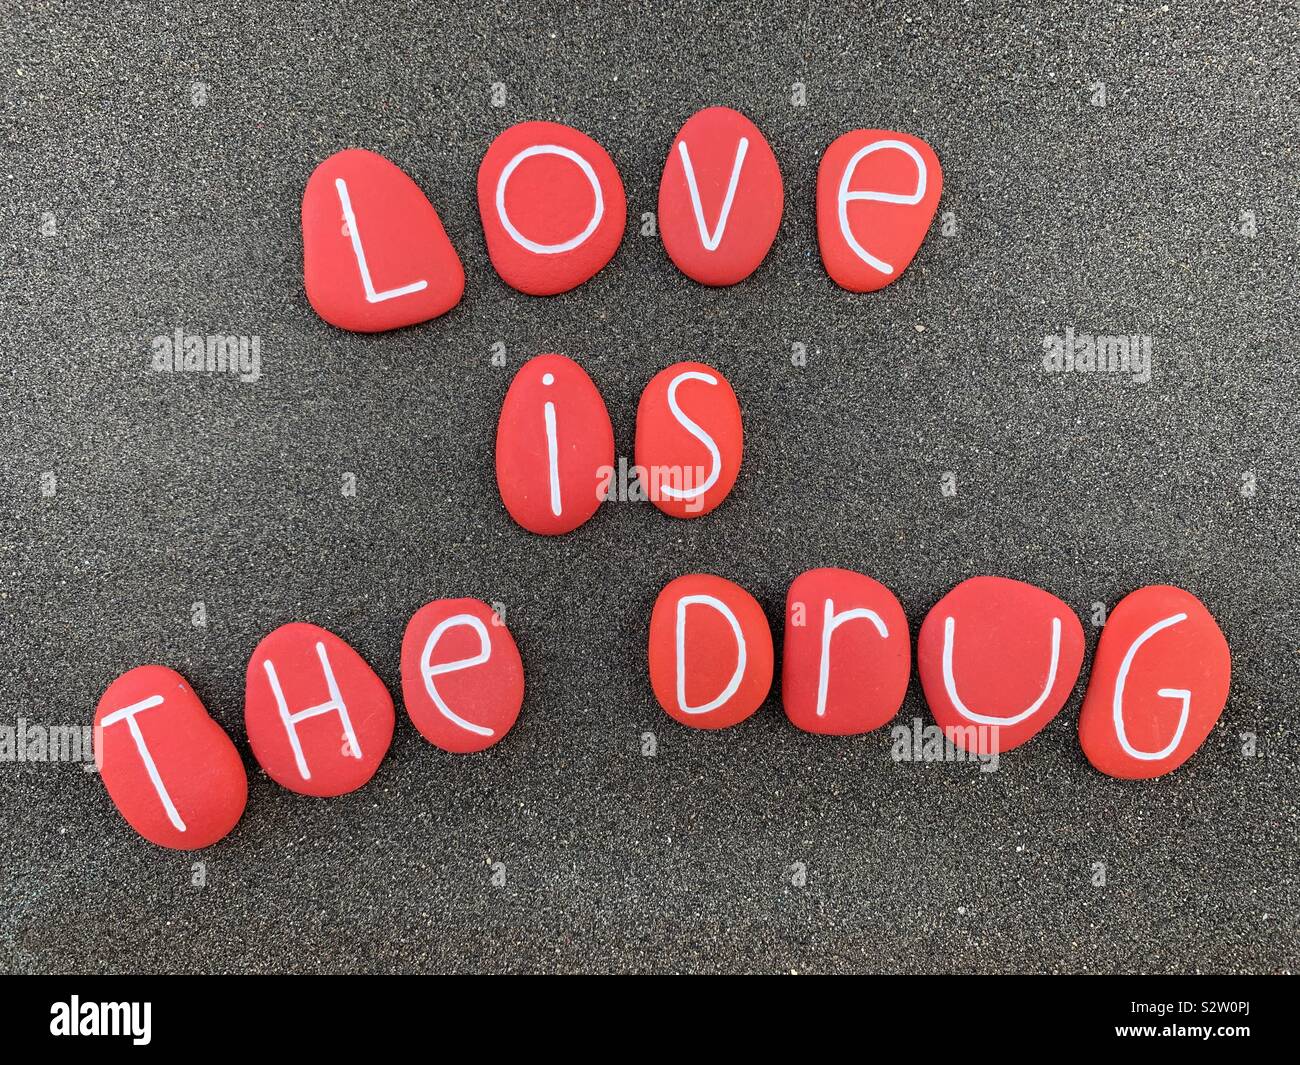 Love is the drug Stock Photo